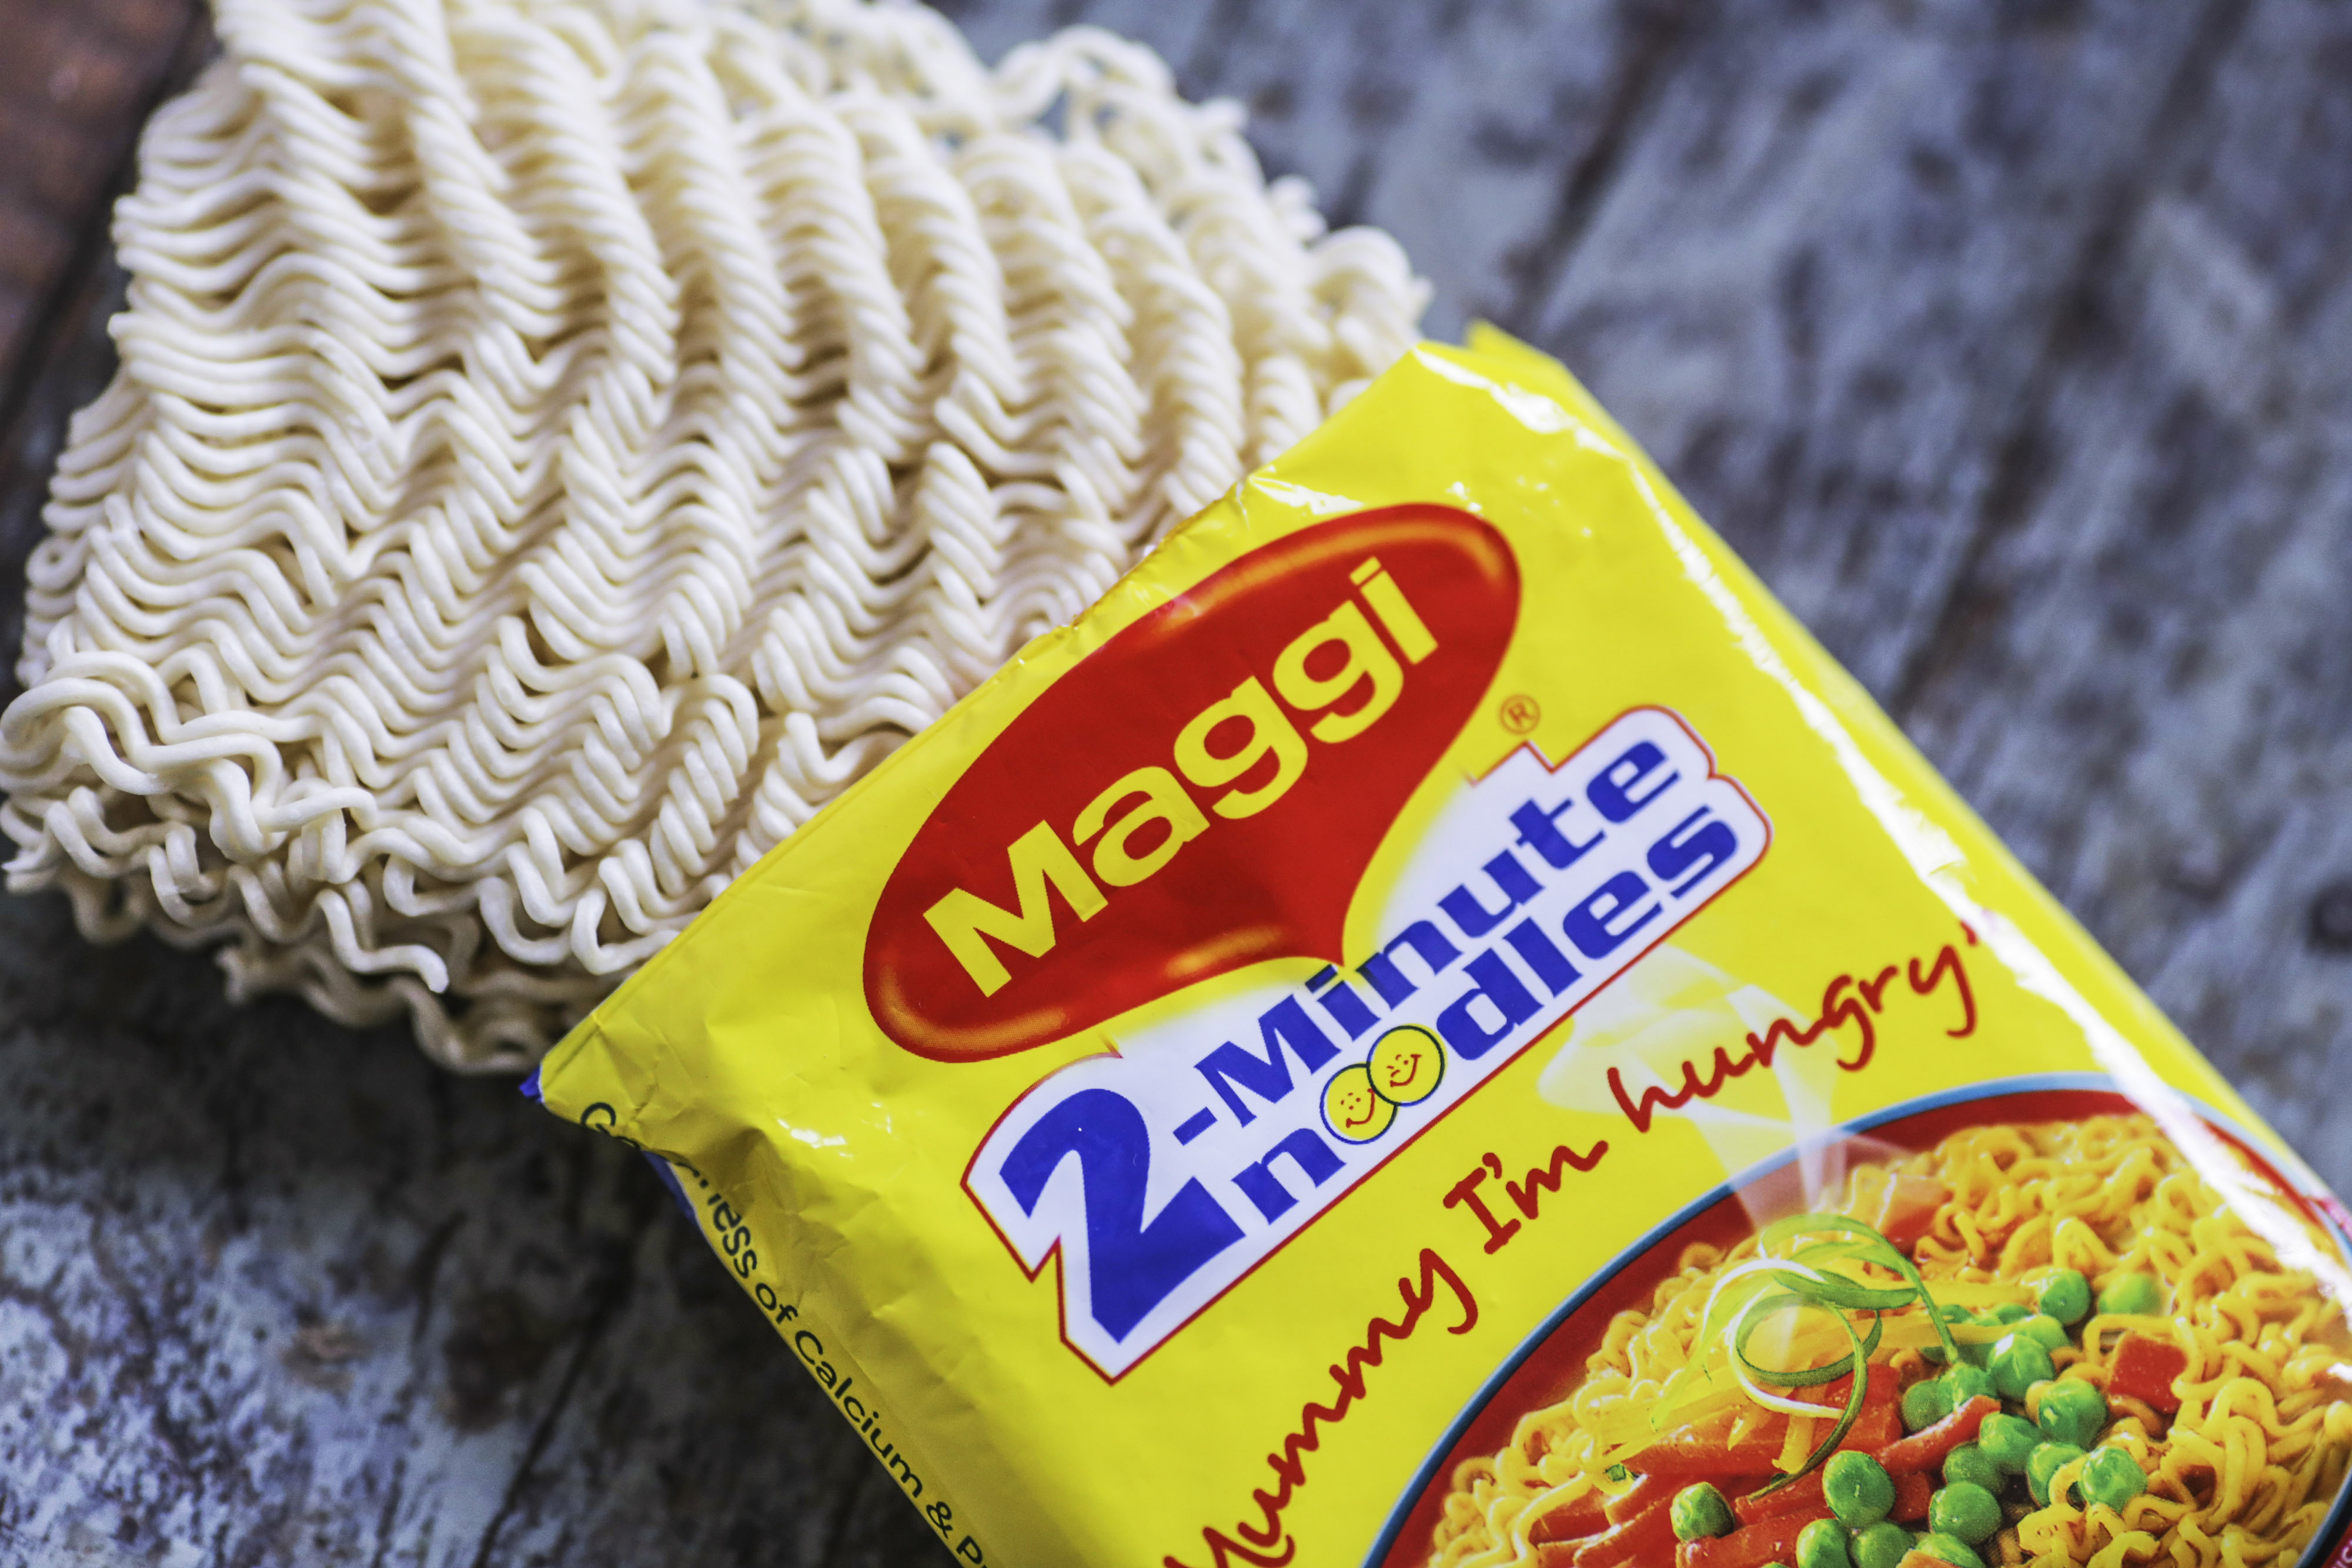 An open packet of Maggi 2-Minute Noodles, manufactured by Nestle India Ltd., are arranged for a photograph inside a general store in Mumbai, on June 2, 2015. (Dhiraj Singh—Bloomberg/Getty Images)